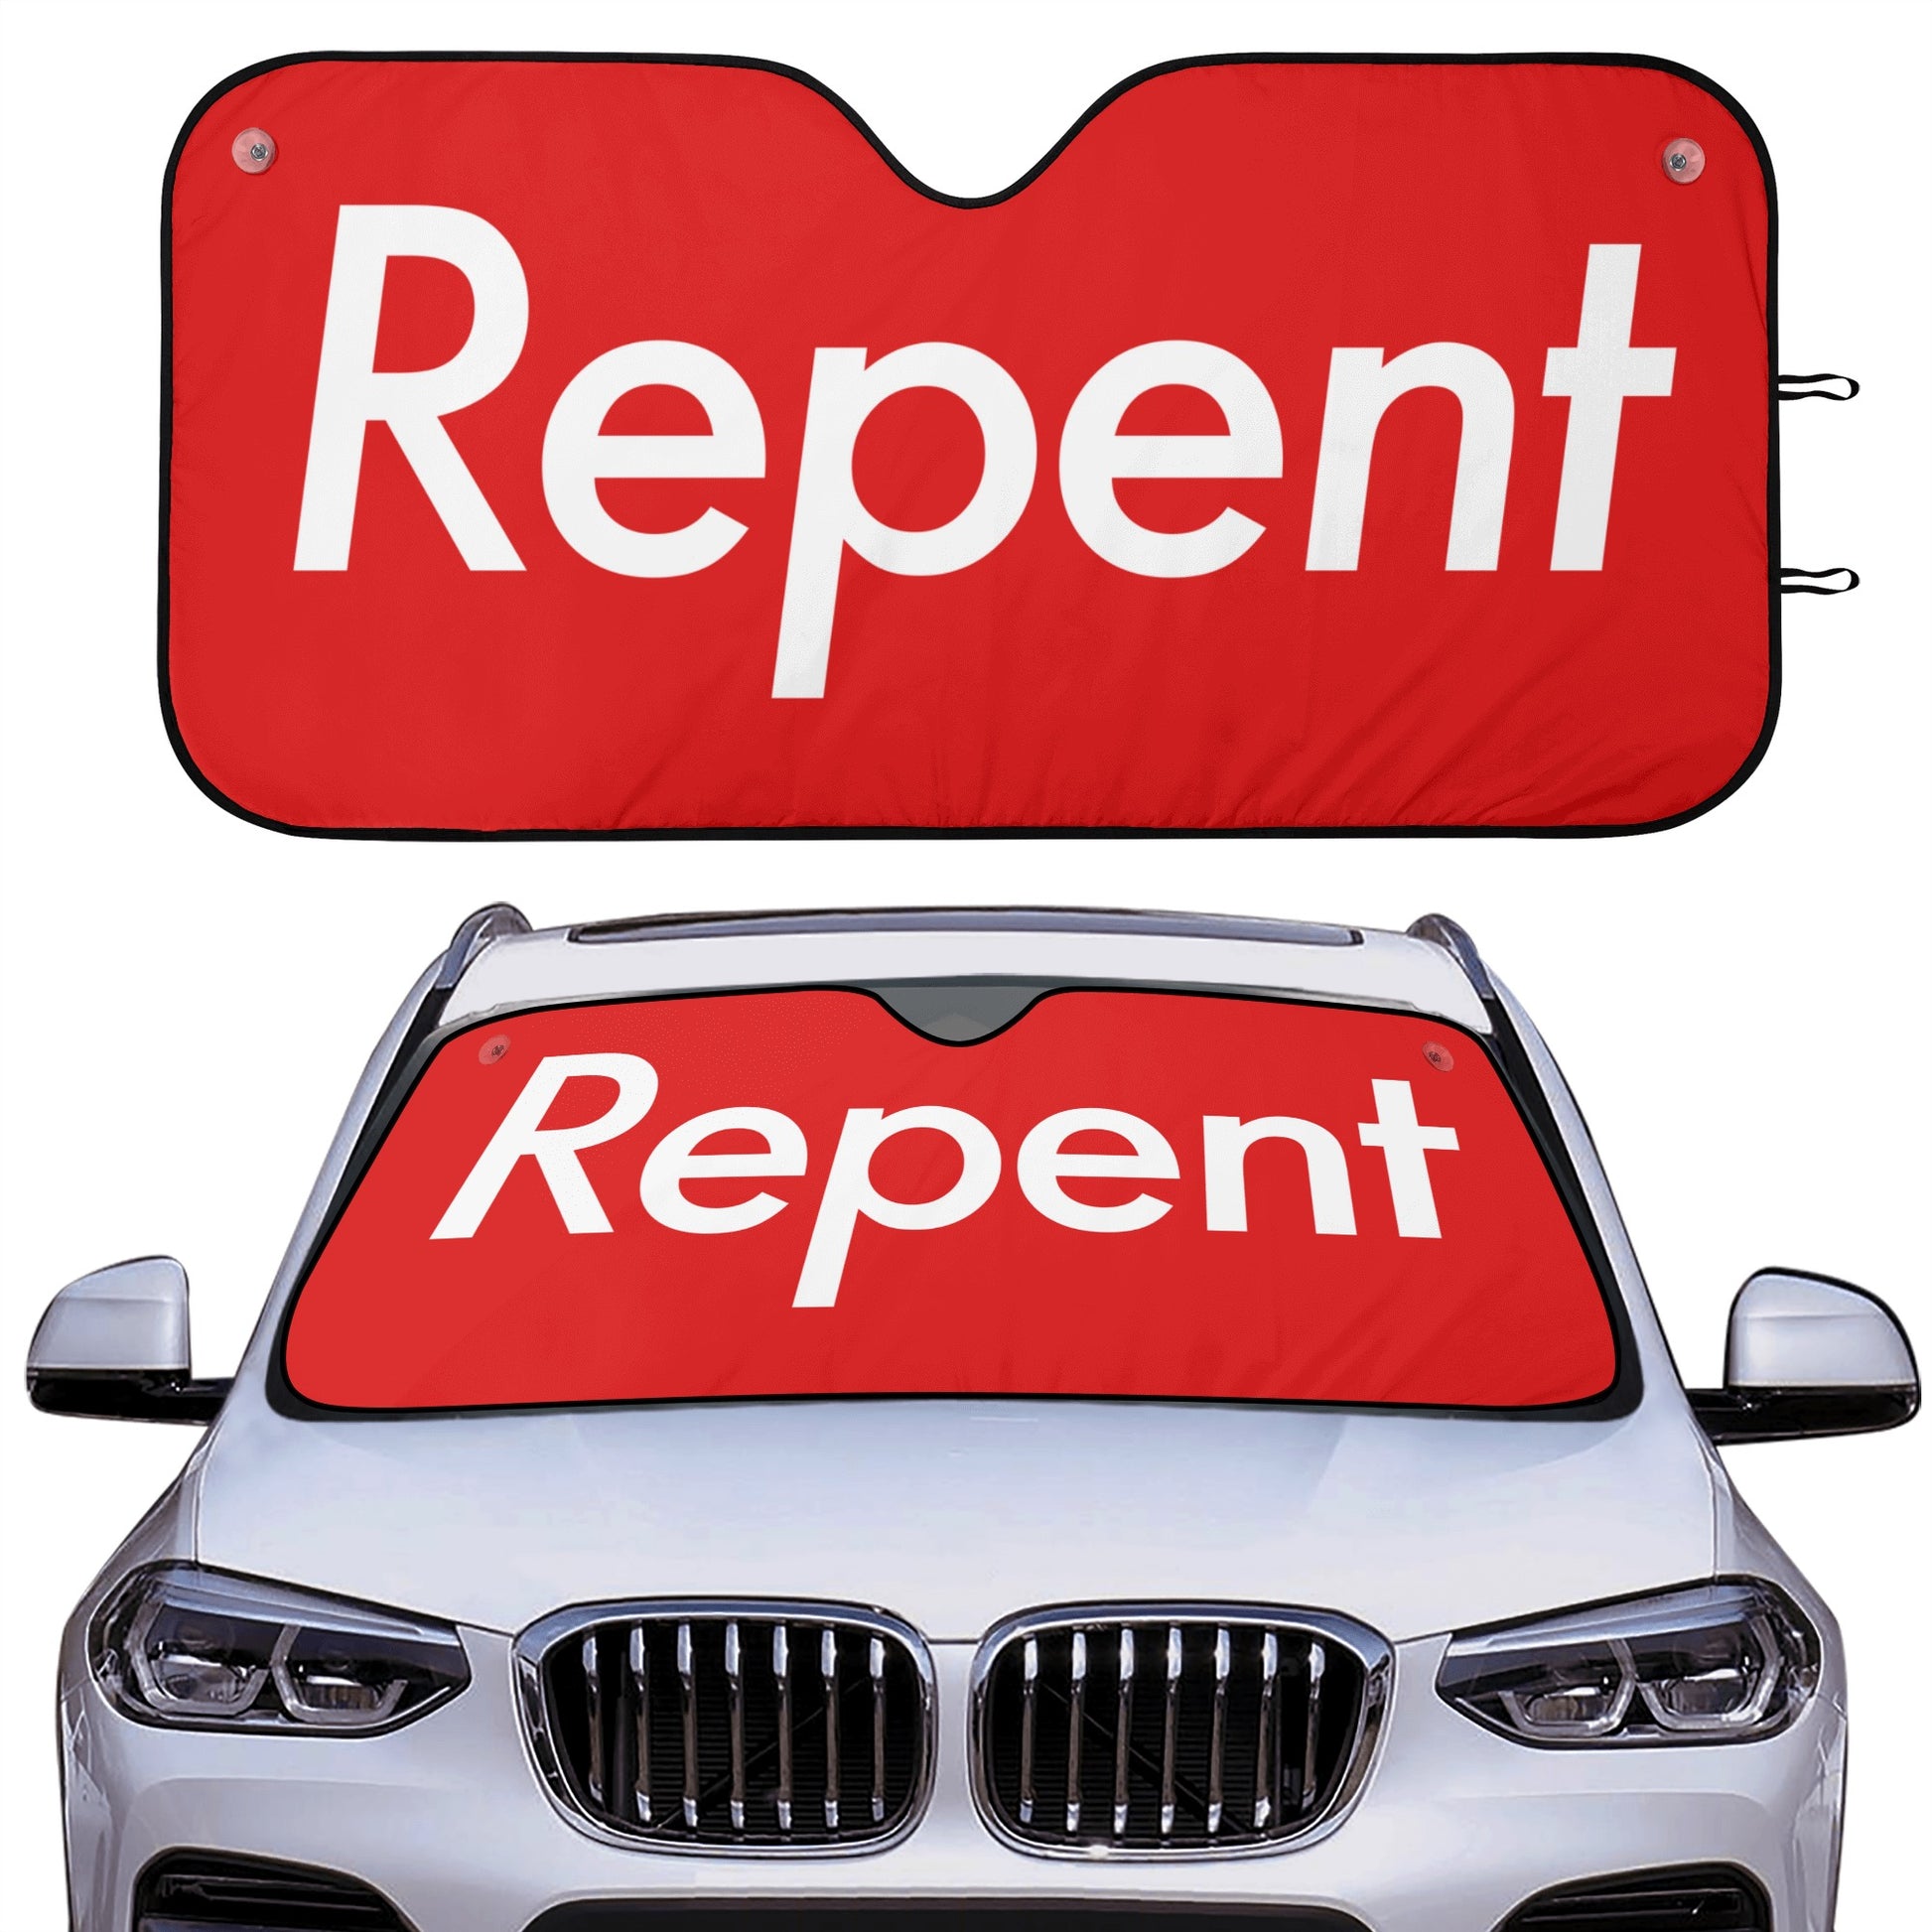 Repent windshield cover for cars and trucks from Nauvoo Supply Co